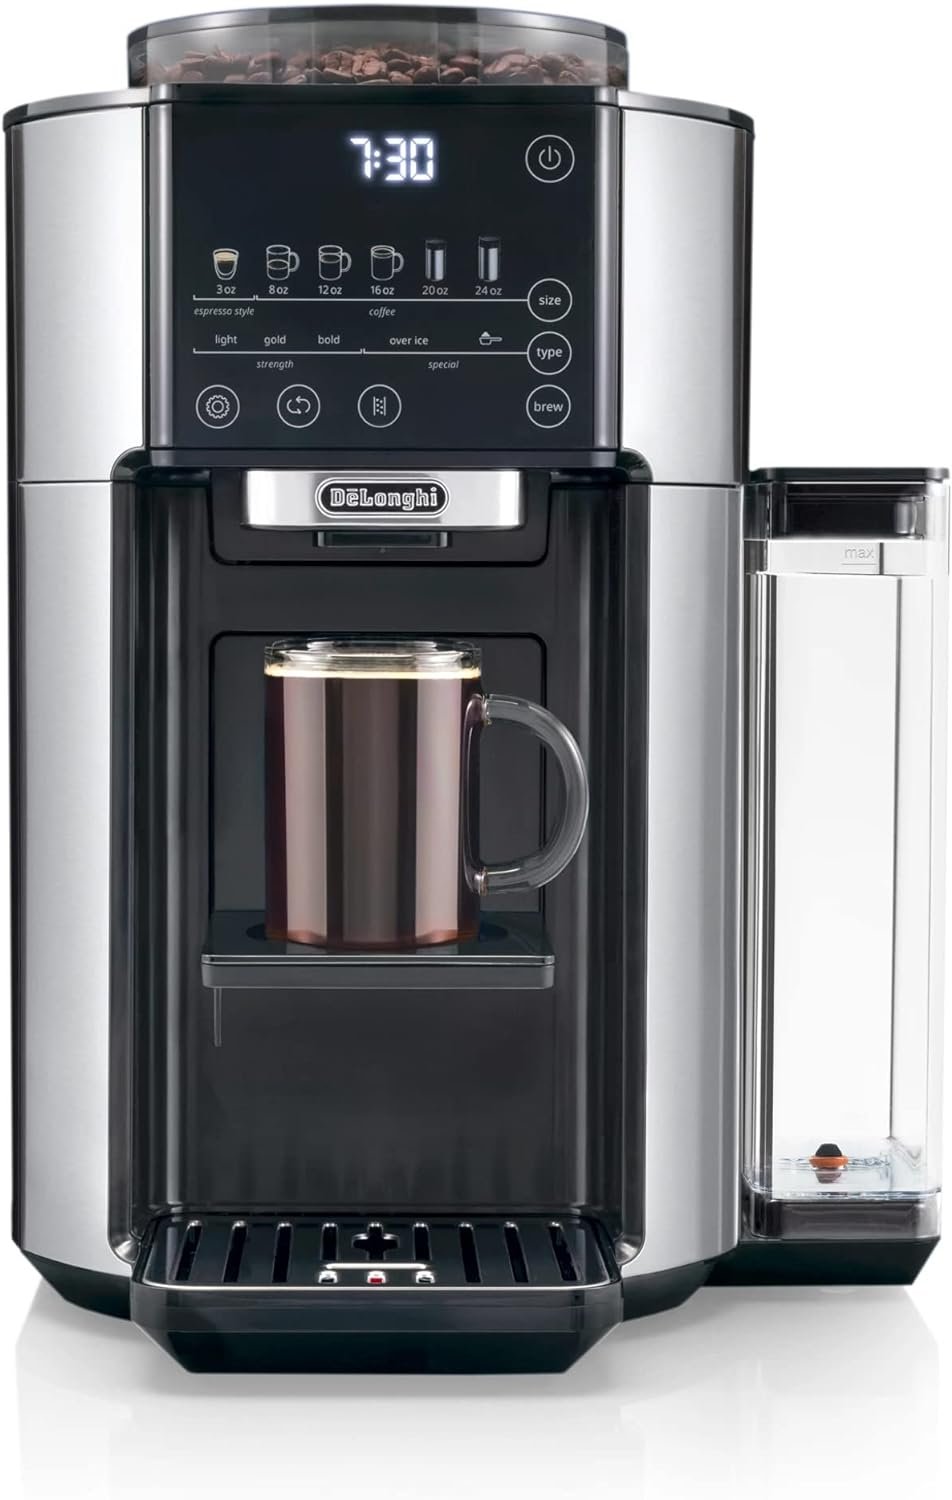 DeLonghi TrueBrew Drip Coffee Maker, Built in Grinder, Single Serve, 8 oz to 24 oz, Hot or Iced Coffee, Stainless, CAM51025MB, 15D x 13.7W x 15.8H